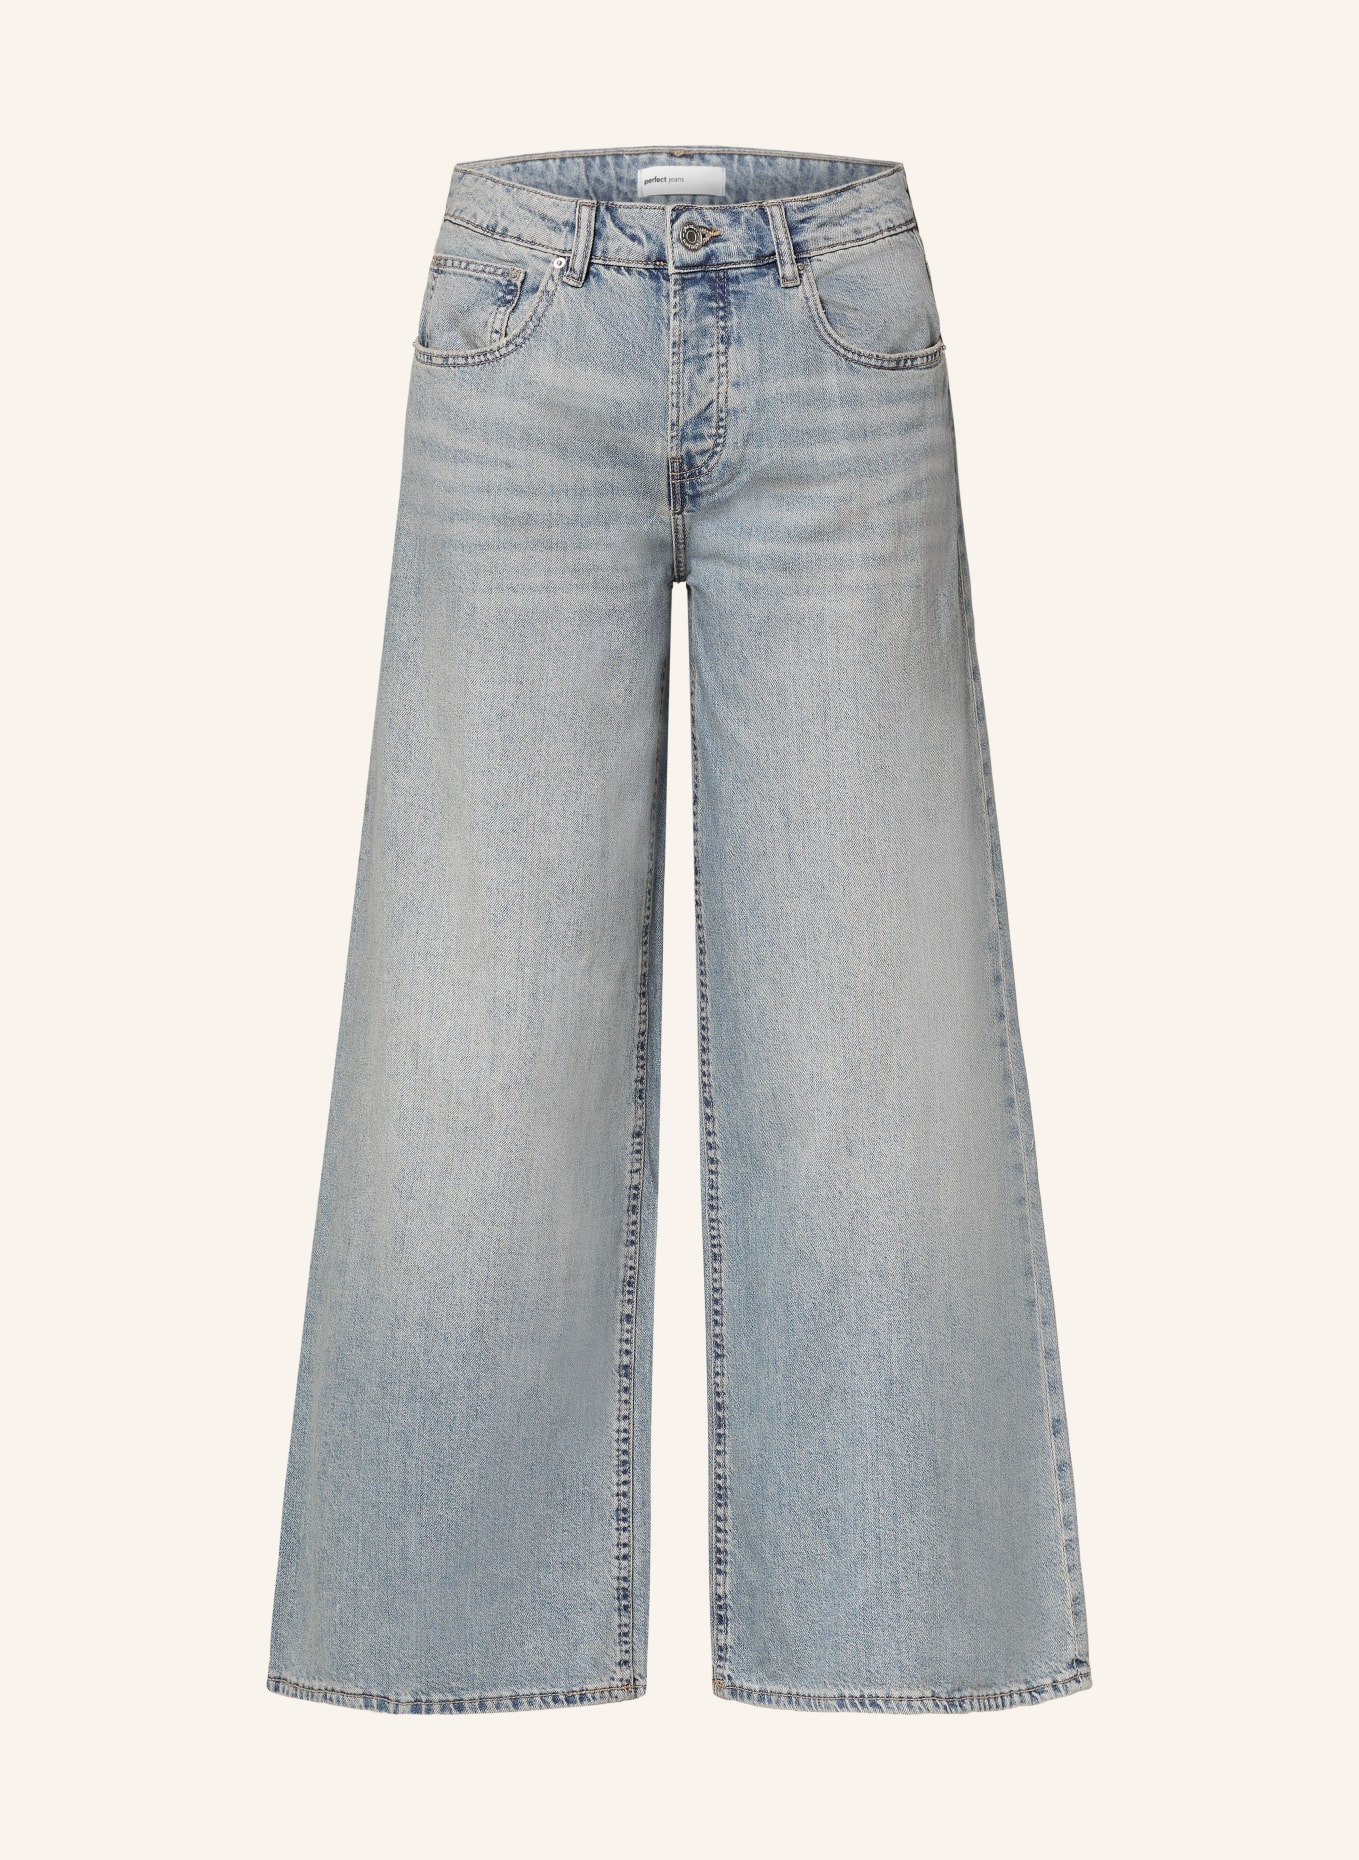 gina tricot Flared jeans, Color: 5326 Dusty blue (Image 1)